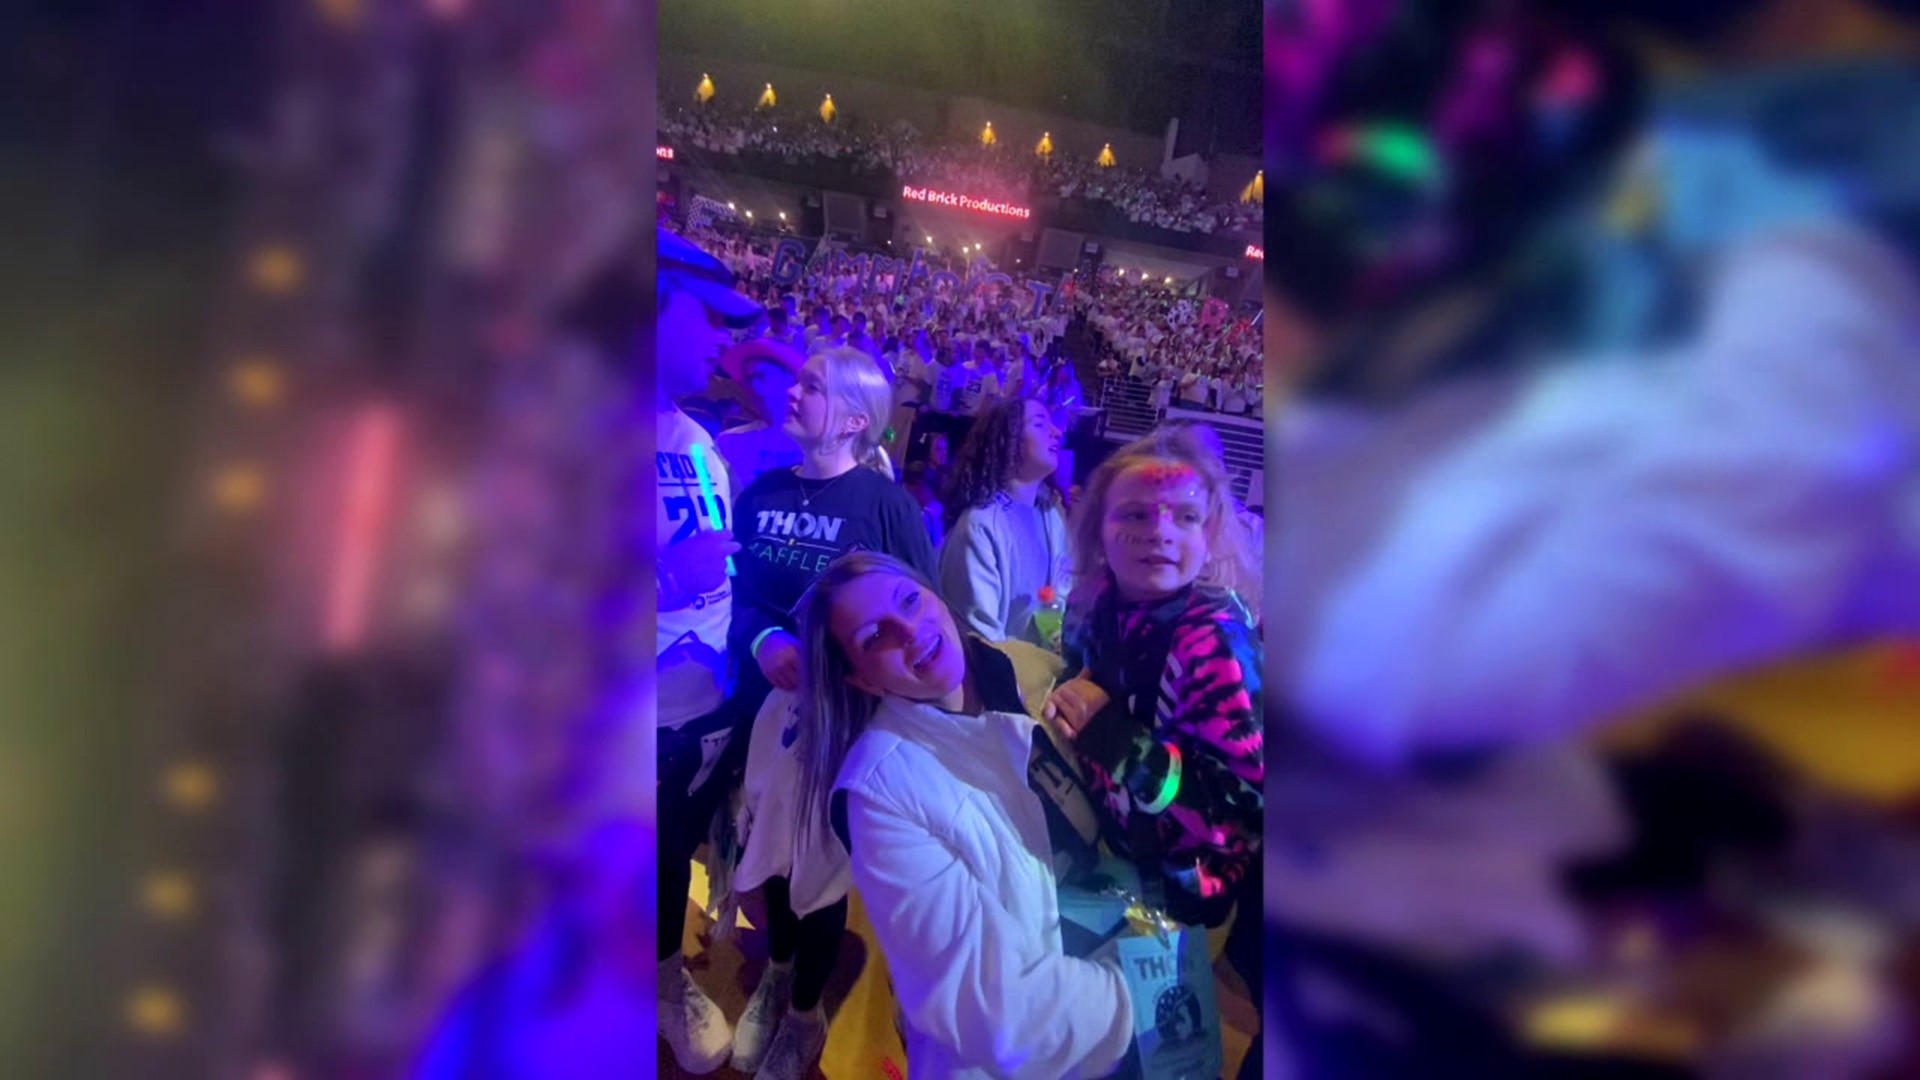 THON wrapped up with over $15 million raised and a family in Schuylkill County will benefit directly from the record-breaking weekend at Penn State.